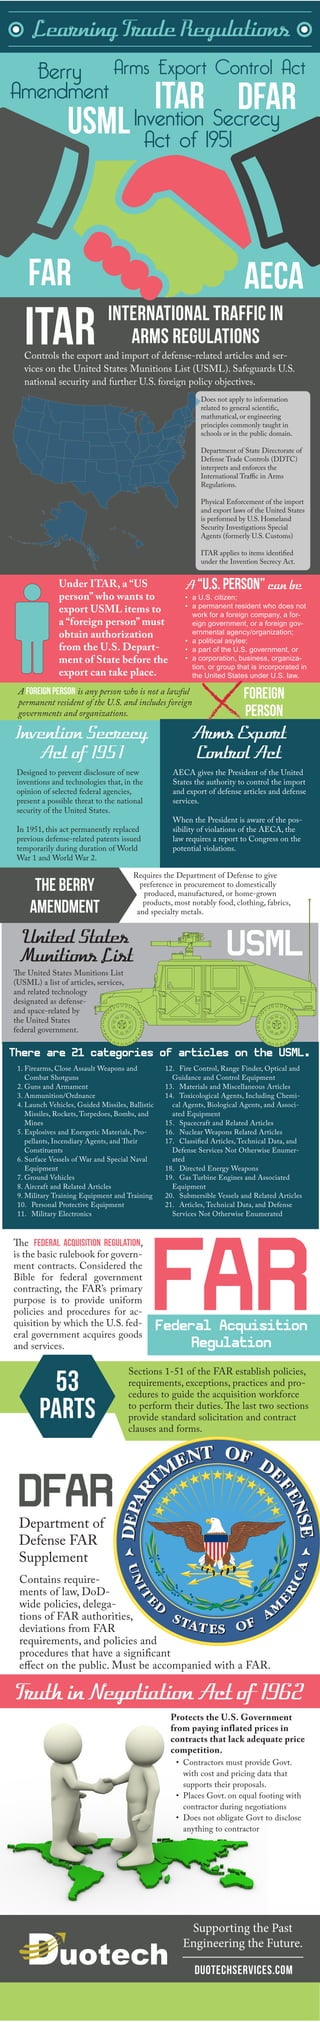 Learning Trade Regulations
ITAR
Berry
Amendment
Invention Secrecy
Act of 1951
usml
far aeca
ITARControls the export and import of defense-related articles and ser-
vices on the United States Munitions List (USML). Safeguards U.S.
national security and further U.S. foreign policy objectives.
International Traffic in
Arms Regulations
Does not apply to information
related to general scientific,
mathmatical, or engineering
principles commonly taught in
schools or in the public domain.
Department of State Directorate of
Defense Trade Controls (DDTC)
interprets and enforces the
International Traffic in Arms
Regulations.
Physical Enforcement of the import
and export laws of the United States
is performed by U.S. Homeland
Security Investigations Special
Agents (formerly U.S. Customs)
ITAR applies to items identified
under the Invention Secrecy Act.
Under ITAR, a “US
person” who wants to
export USML items to
a “foreign person” must
obtain authorization
from the U.S. Depart-
ment of State before the
export can take place.
A “U.S. Person” can be
•	 a U.S. citizen;
•	 a permanent resident who does not
work for a foreign company, a for-
eign government, or a foreign gov-
ernmental agency/organization;
•	 a political asylee;
•	 a part of the U.S. government, or
•	 a corporation, business, organiza-
tion, or group that is incorporated in
the United States under U.S. law.
A foreign person is any person who is not a lawful
permanent resident of the U.S. and includes foreign
governments and organizations.
Foreign
Person
Invention Secrecy
Act of 1951
Designed to prevent disclosure of new
inventions and technologies that, in the
opinion of selected federal agencies,
present a possible threat to the national
security of the United States.
In 1951, this act permanently replaced
previous defense-related patents issued
temporarily during duration of World
War 1 and World War 2.
Arms Export
Control Act
AECA gives the President of the United
States the authority to control the import
and export of defense articles and defense
services.
When the President is aware of the pos-
sibility of violations of the AECA, the
law requires a report to Congress on the
potential violations.
The Berry
Amendment
Requires the Department of Defense to give
preference in procurement to domestically
produced, manufactured, or home-grown
products, most notably food, clothing, fabrics,
and specialty metals.
United States
Munitions List
The United States Munitions List
(USML) a list of articles, services,
and related technology
designated as defense-
and space-related by
the United States
federal government.
1.	Firearms, Close Assault Weapons and
Combat Shotguns
2.	Guns and Armament
3.	Ammunition/Ordnance
4.	Launch Vehicles, Guided Missiles, Ballistic
Missiles, Rockets, Torpedoes, Bombs, and
Mines
5.	Explosives and Energetic Materials, Pro-
pellants, Incendiary Agents, and Their
Constituents
6.	Surface Vessels of War and Special Naval
Equipment
7.	Ground Vehicles
8.	Aircraft and Related Articles
9.	Military Training Equipment and Training
10.	 Personal Protective Equipment
11.	 Military Electronics
12.	 Fire Control, Range Finder, Optical and
Guidance and Control Equipment
13.	 Materials and Miscellaneous Articles
14.	 Toxicological Agents, Including Chemi-
cal Agents, Biological Agents, and Associ-
ated Equipment
15.	 Spacecraft and Related Articles
16.	 Nuclear Weapons Related Articles
17.	 Classified Articles, Technical Data, and
Defense Services Not Otherwise Enumer-
ated
18.	 Directed Energy Weapons
19.	 Gas Turbine Engines and Associated
Equipment
20.	 Submersible Vessels and Related Articles
21.	 Articles, Technical Data, and Defense
Services Not Otherwise Enumerated
There are 21 categories of articles on the USML.
FARFederal Acquisition
Regulation
The Federal Acquisition Regulation,
is the basic rulebook for govern-
ment contracts. Considered the
Bible for federal government
contracting, the FAR’s primary
purpose is to provide uniform
policies and procedures for ac-
quisition by which the U.S. fed-
eral government acquires goods
and services.
Sections 1-51 of the FAR establish policies,
requirements, exceptions, practices and pro-
cedures to guide the acquisition workforce
to perform their duties. The last two sections
provide standard solicitation and contract
clauses and forms.
53
Parts
Department of
Defense FAR
Supplement
DFAR
Contains require-
ments of law, DoD-
wide policies, delega-
tions of FAR authorities,
deviations from FAR
requirements, and policies and
procedures that have a significant
effect on the public. Must be accompanied with a FAR.
Truth in Negotiation Act of 1962
•	 Contractors must provide Govt.
with cost and pricing data that
supports their proposals.
•	 Places Govt. on equal footing with
contractor during negotiations
•	 Does not obligate Govt to disclose
anything to contractor
Protects the U.S. Government
from paying inflated prices in
contracts that lack adequate price
competition.
Arms Export Control Act
dfar
USML
Supporting the Past
Engineering the Future.
DuotechServices.com
 